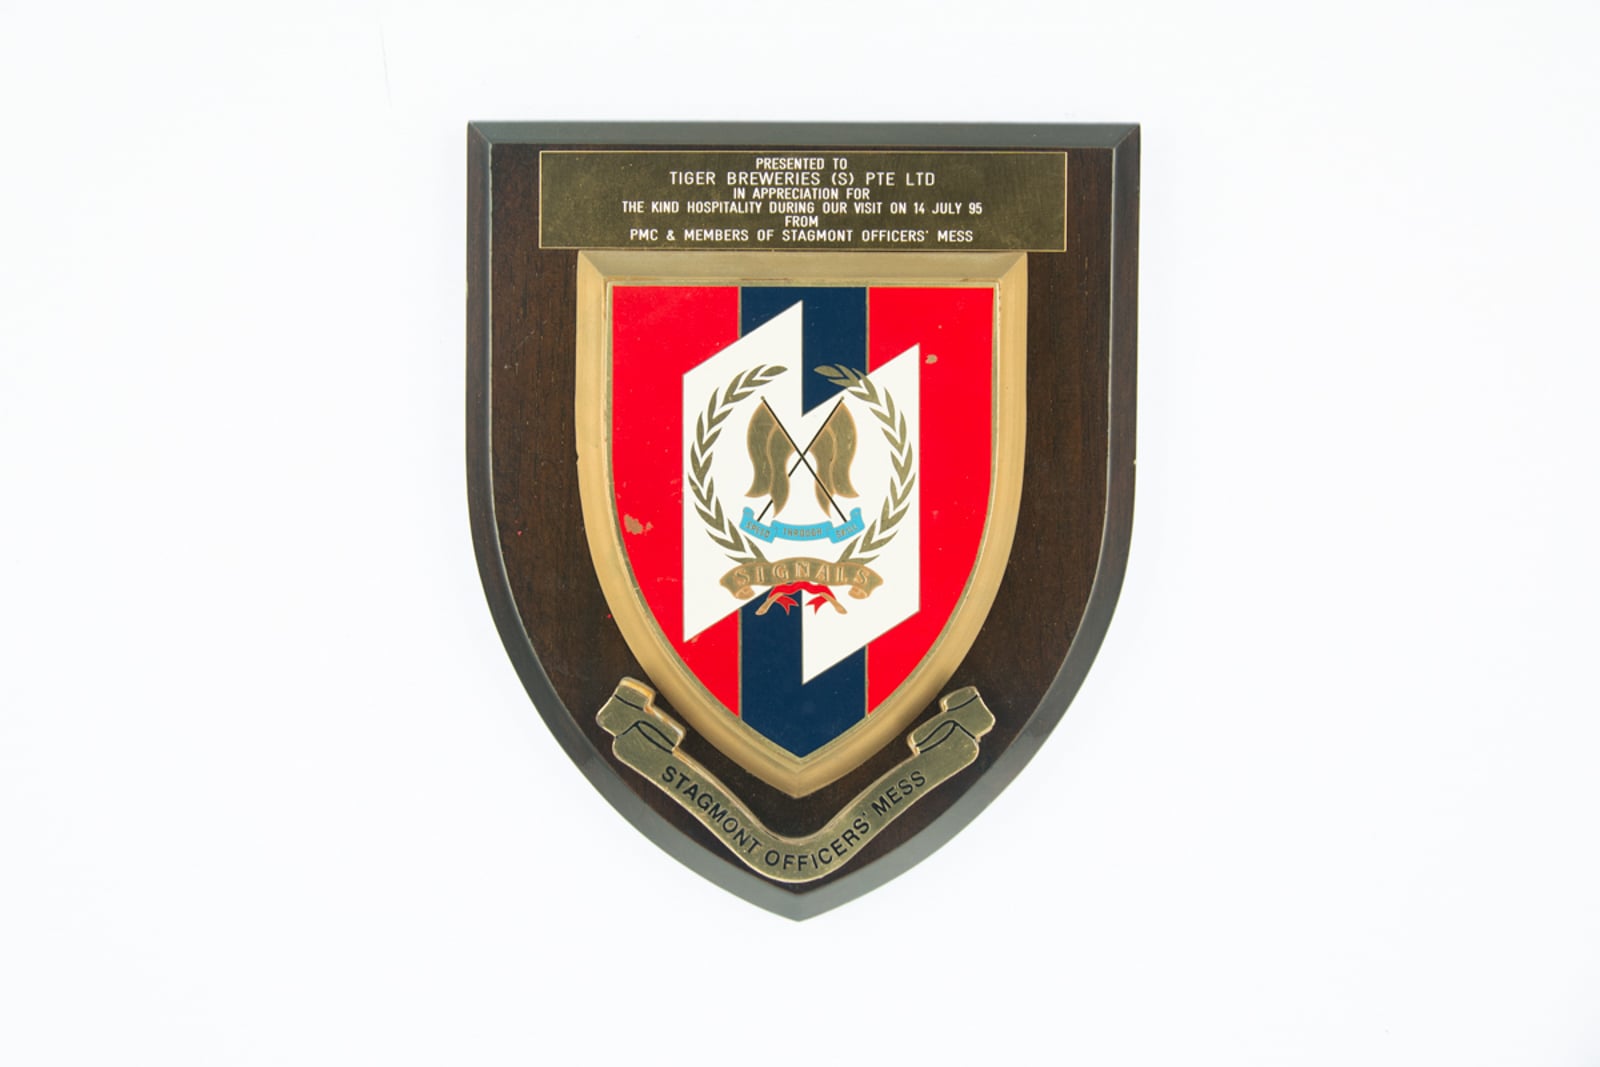 Stagmont Officers' Mess Plaque 1995